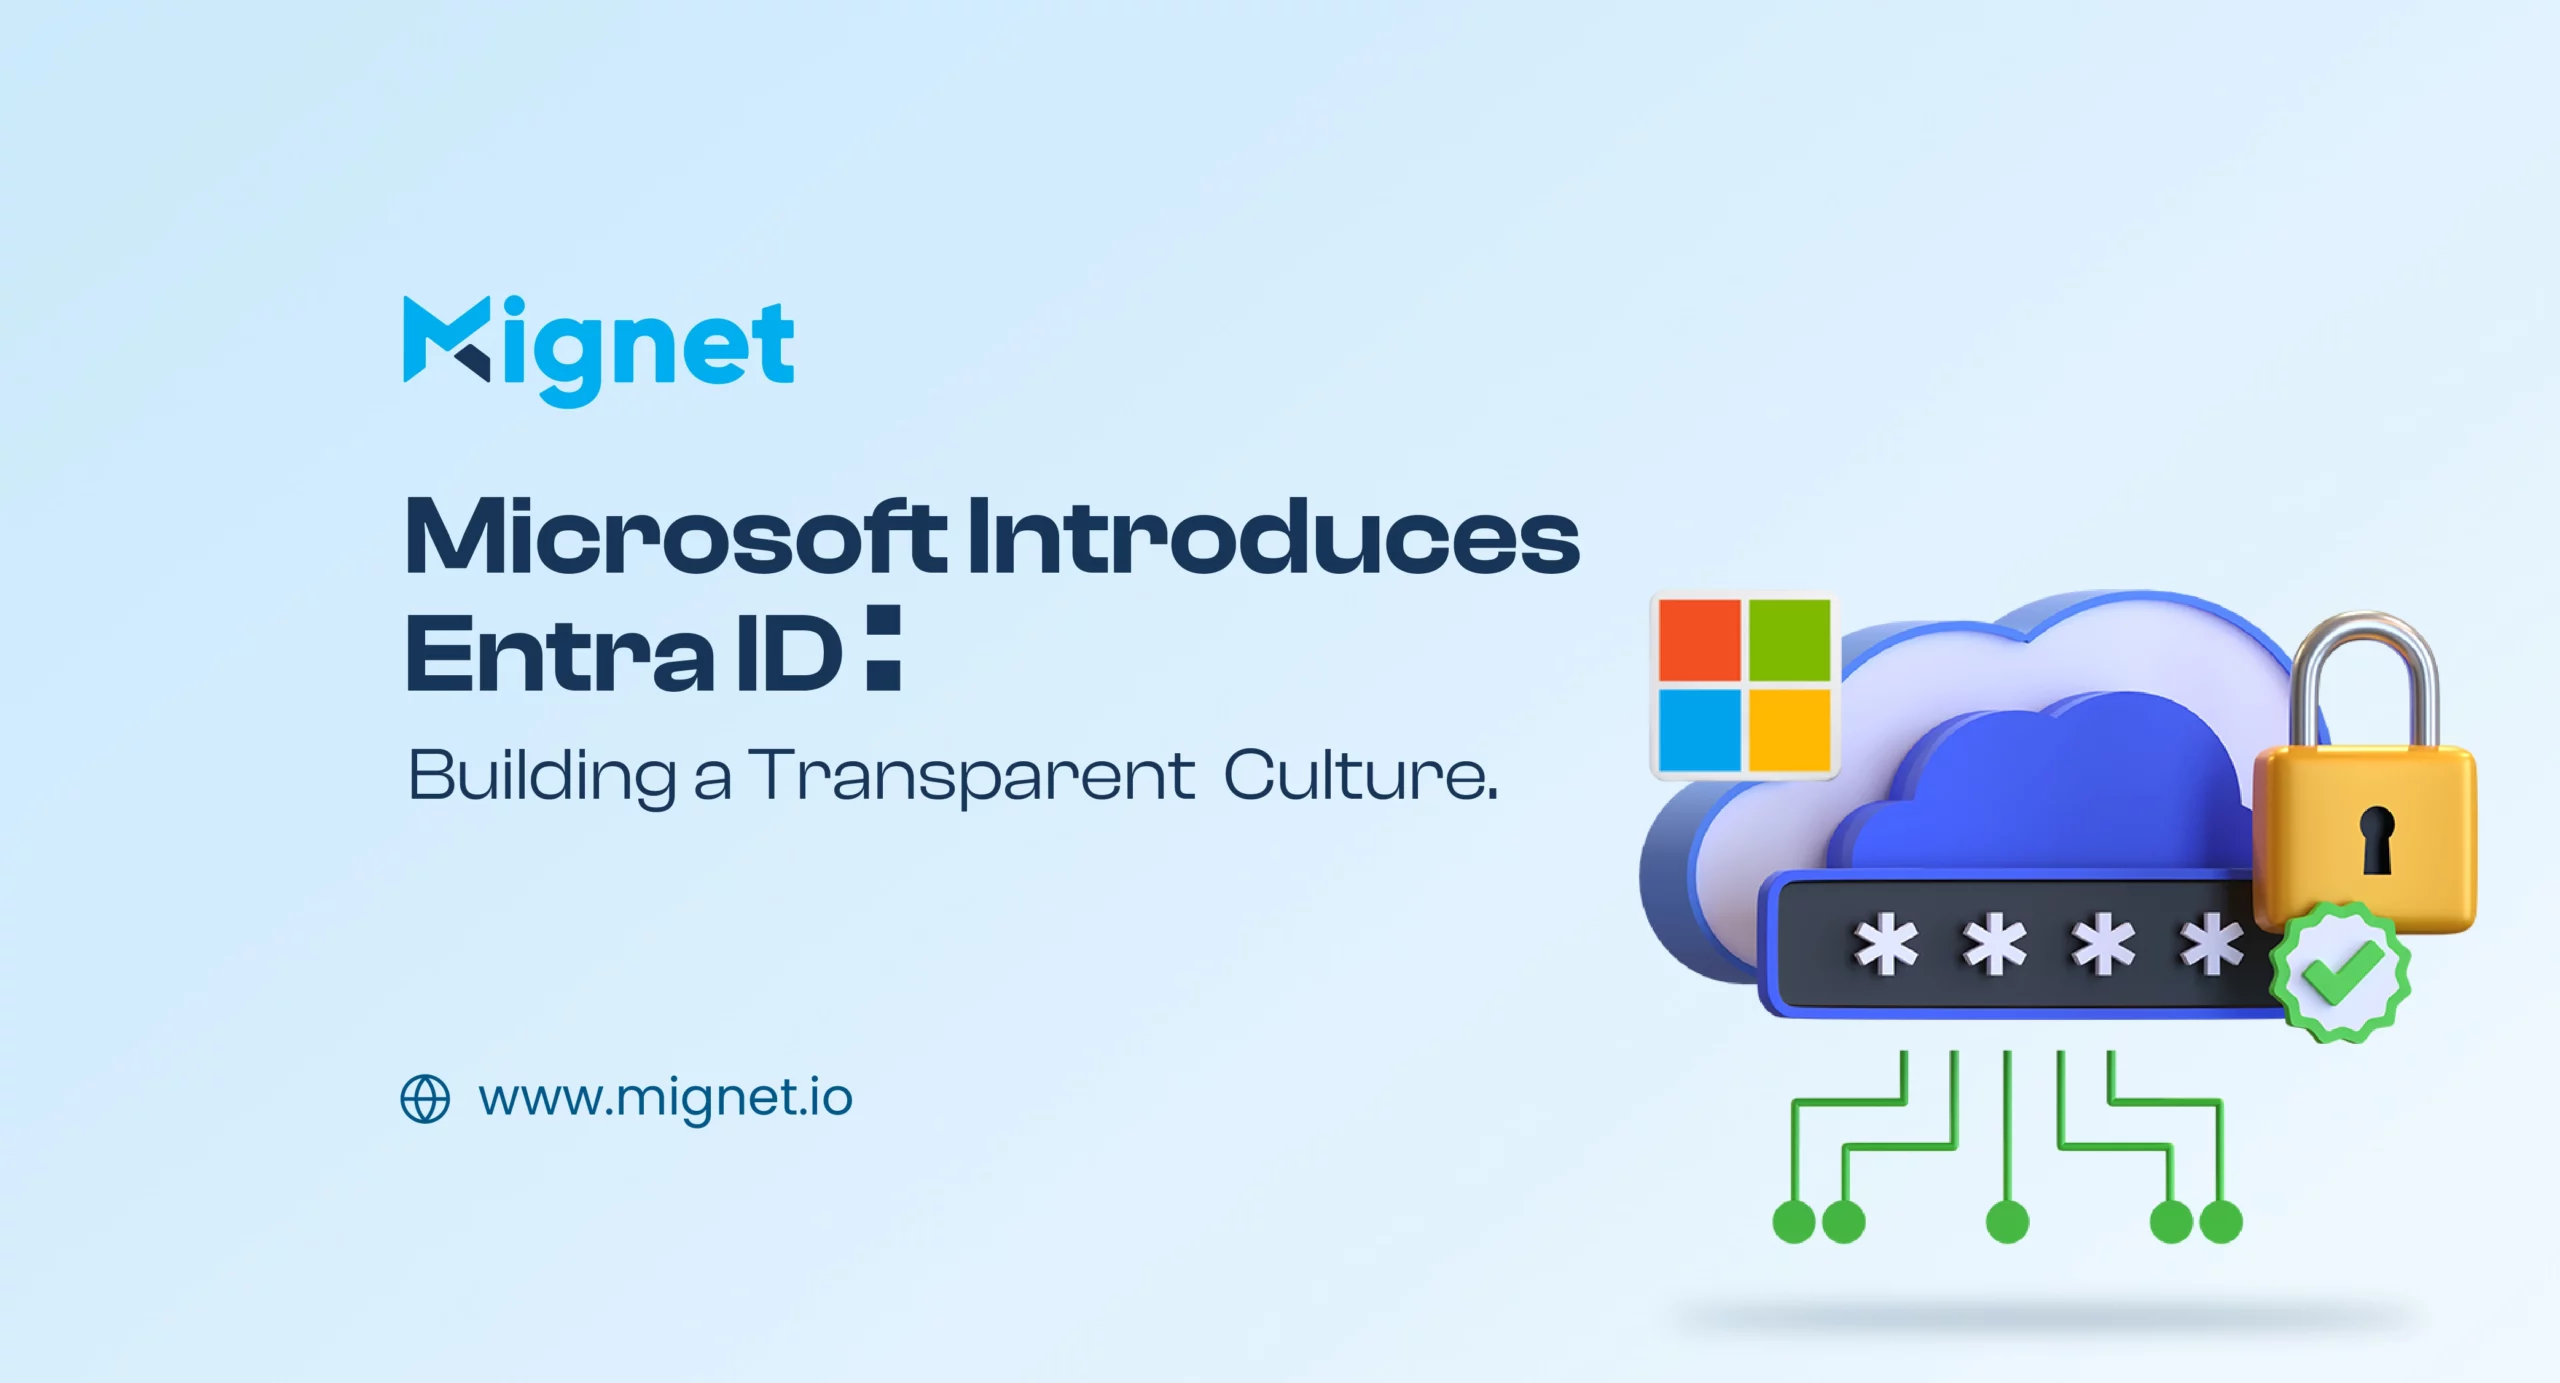 Microsoft Introduces Entra ID: A New Era for Azure Active Directory